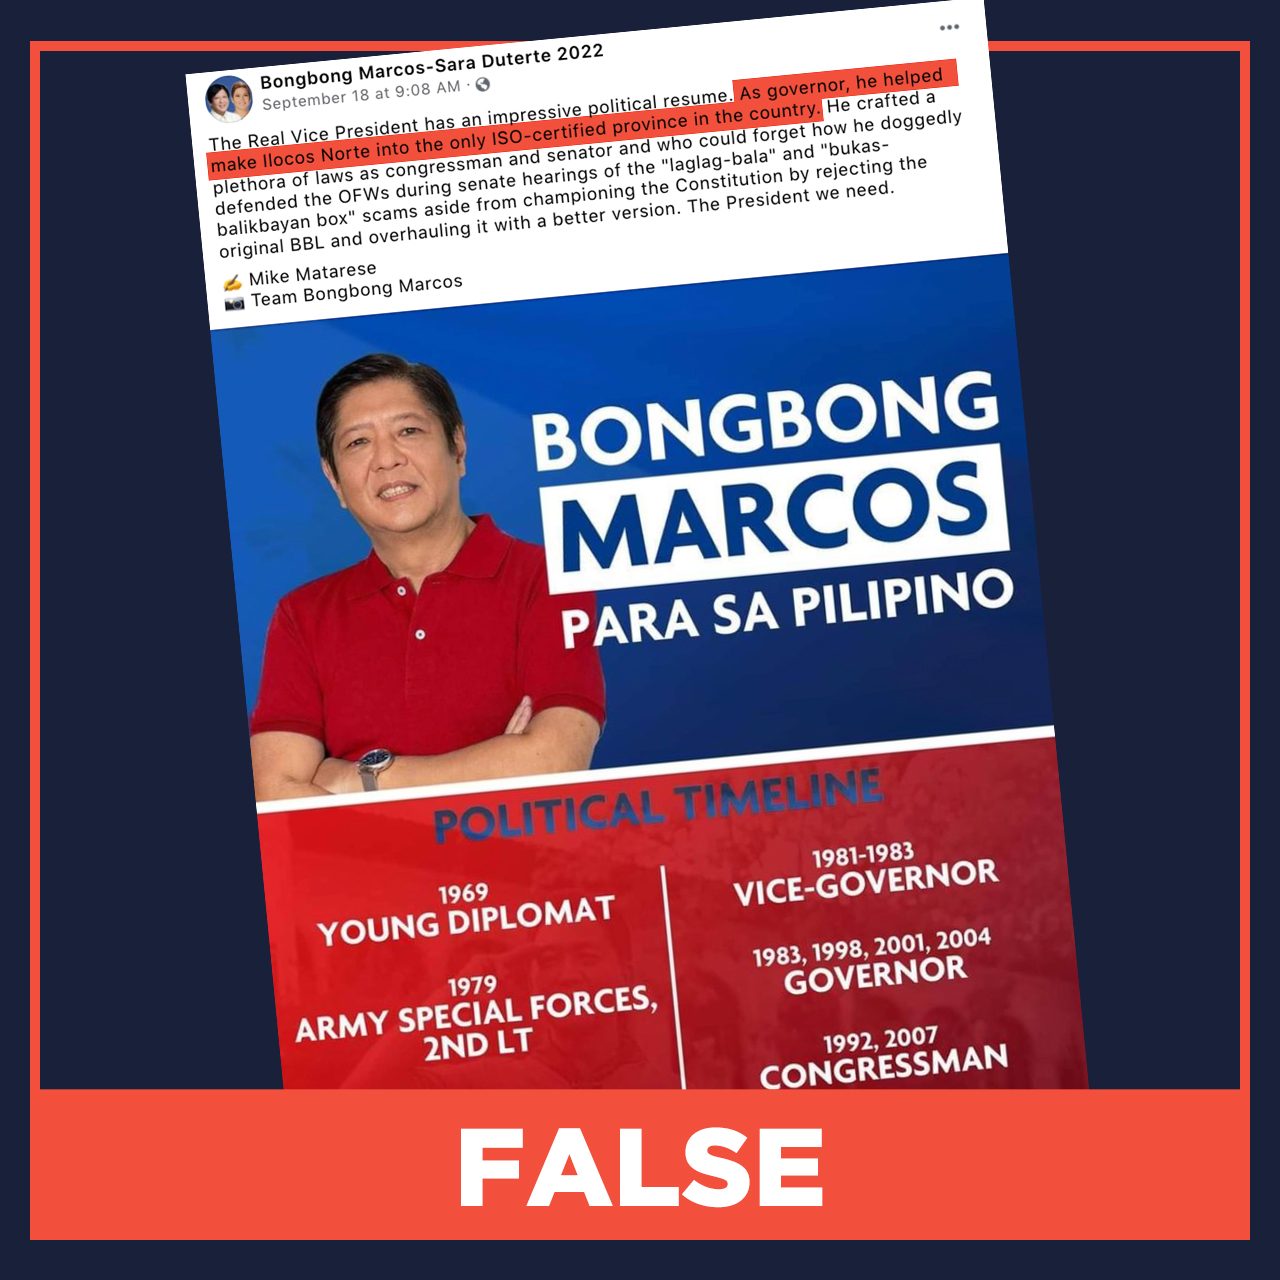 FALSE: Ilocos Norte the only province in the Philippines that got ISO-certified